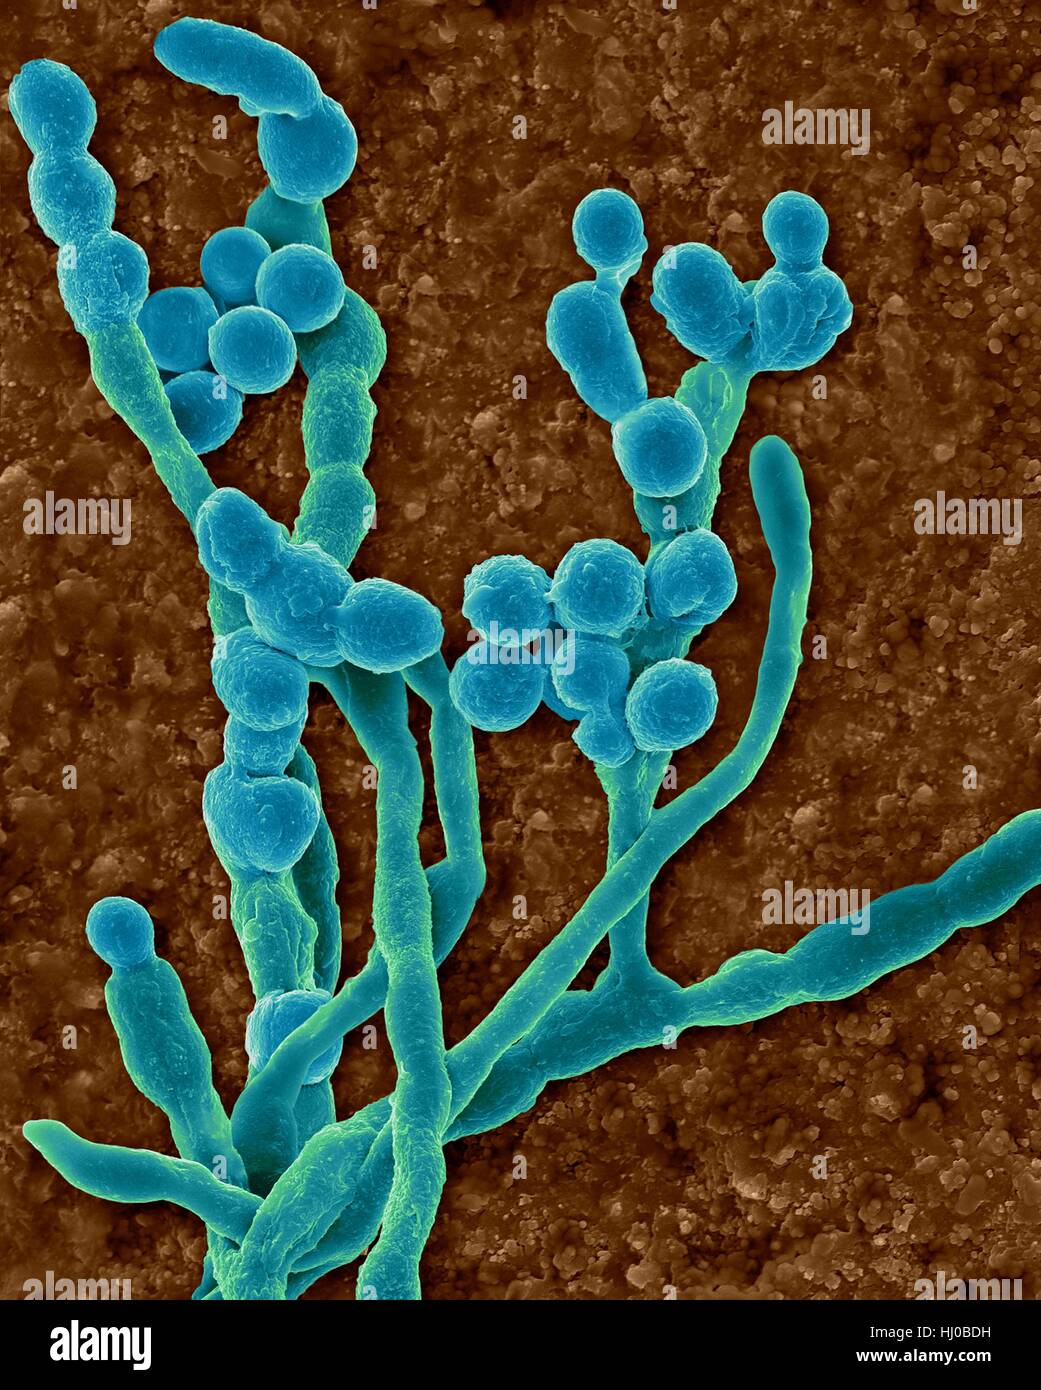 Coloured scanning electron micrograph (SEM) of common environmental allergenic mould (Cladosporium sp.); fungal hyphae producing spores.Also known as Hormodendrum sp.This specimen was found on inner surface of building's air supply duct.This genus is most common outdoor airborne mould but may occur Stock Photo